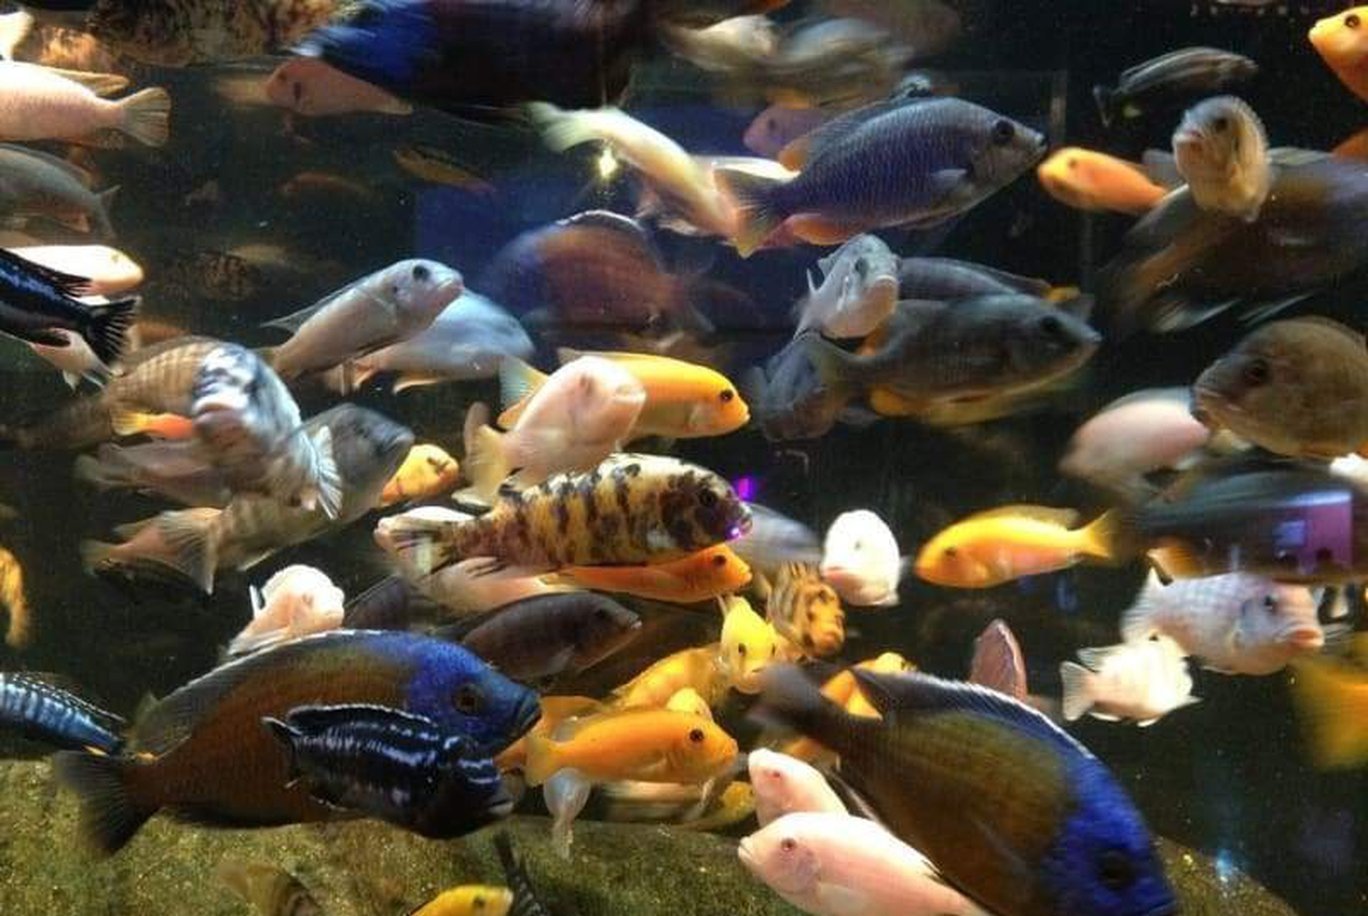 X3 Assorted South American Cichlids Lrg 4" - 5" Each - Fresh Water Free Shipping-Freshwater Fish Package-www.YourFishStore.com